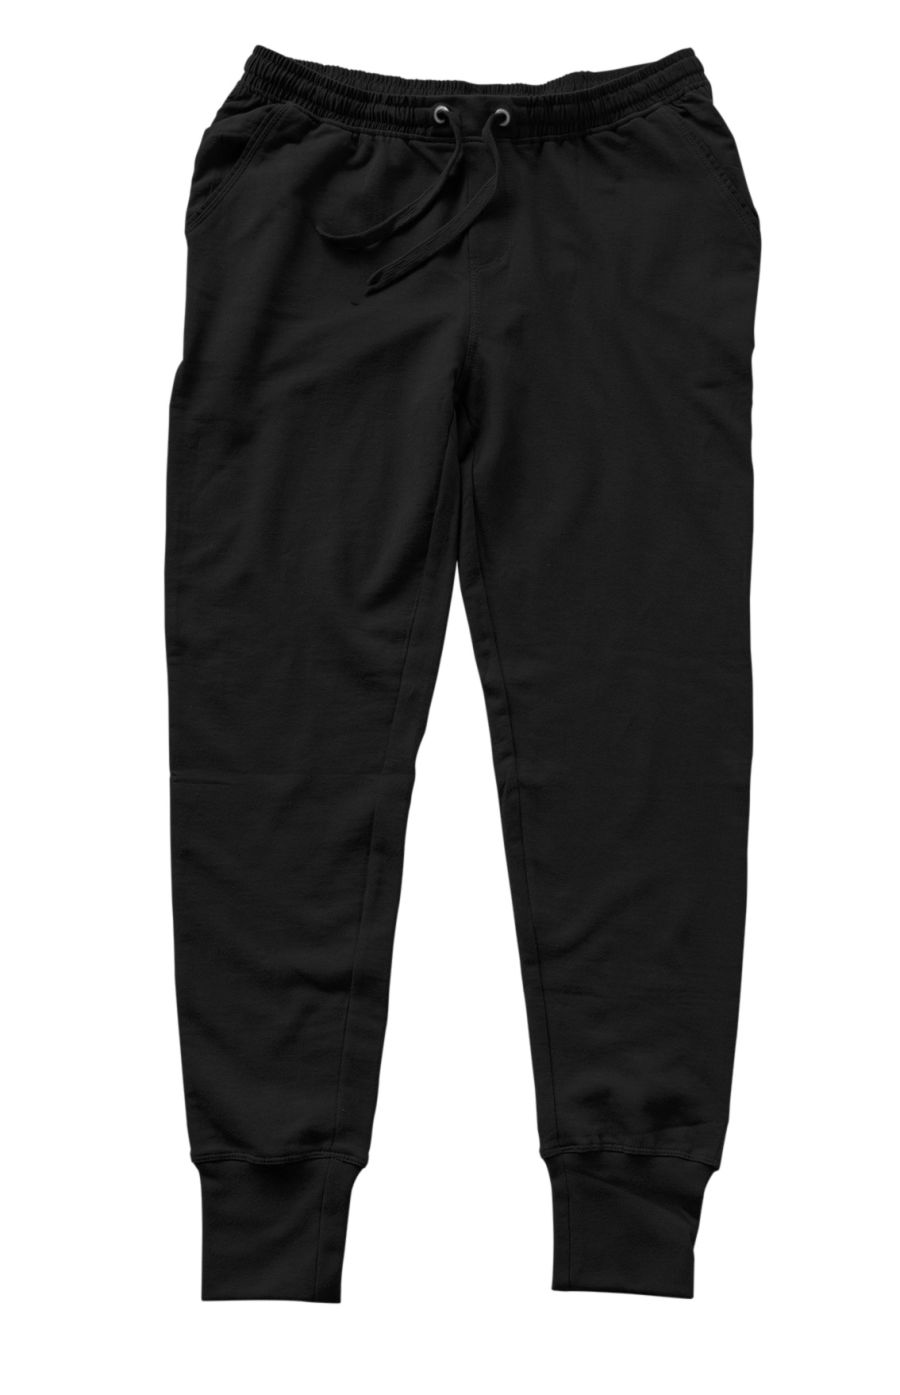 Picture Track Pants 